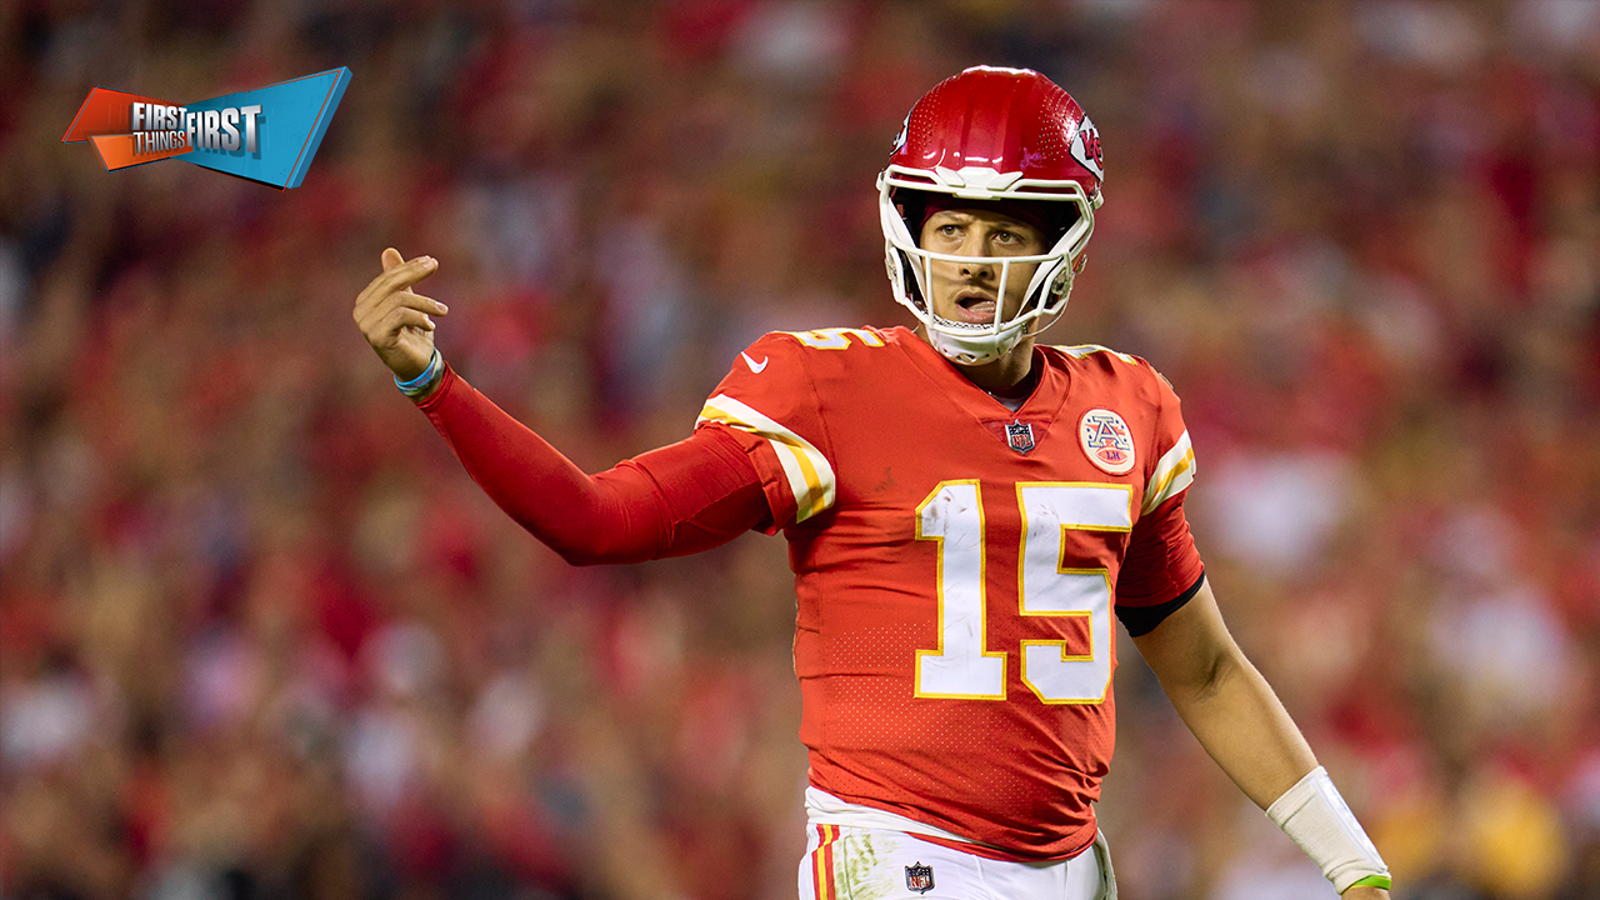 Nick Wright celebrates Patrick Mahomes, Chiefs Week 5 comeback MNF win | FIRST THINGS FIRST